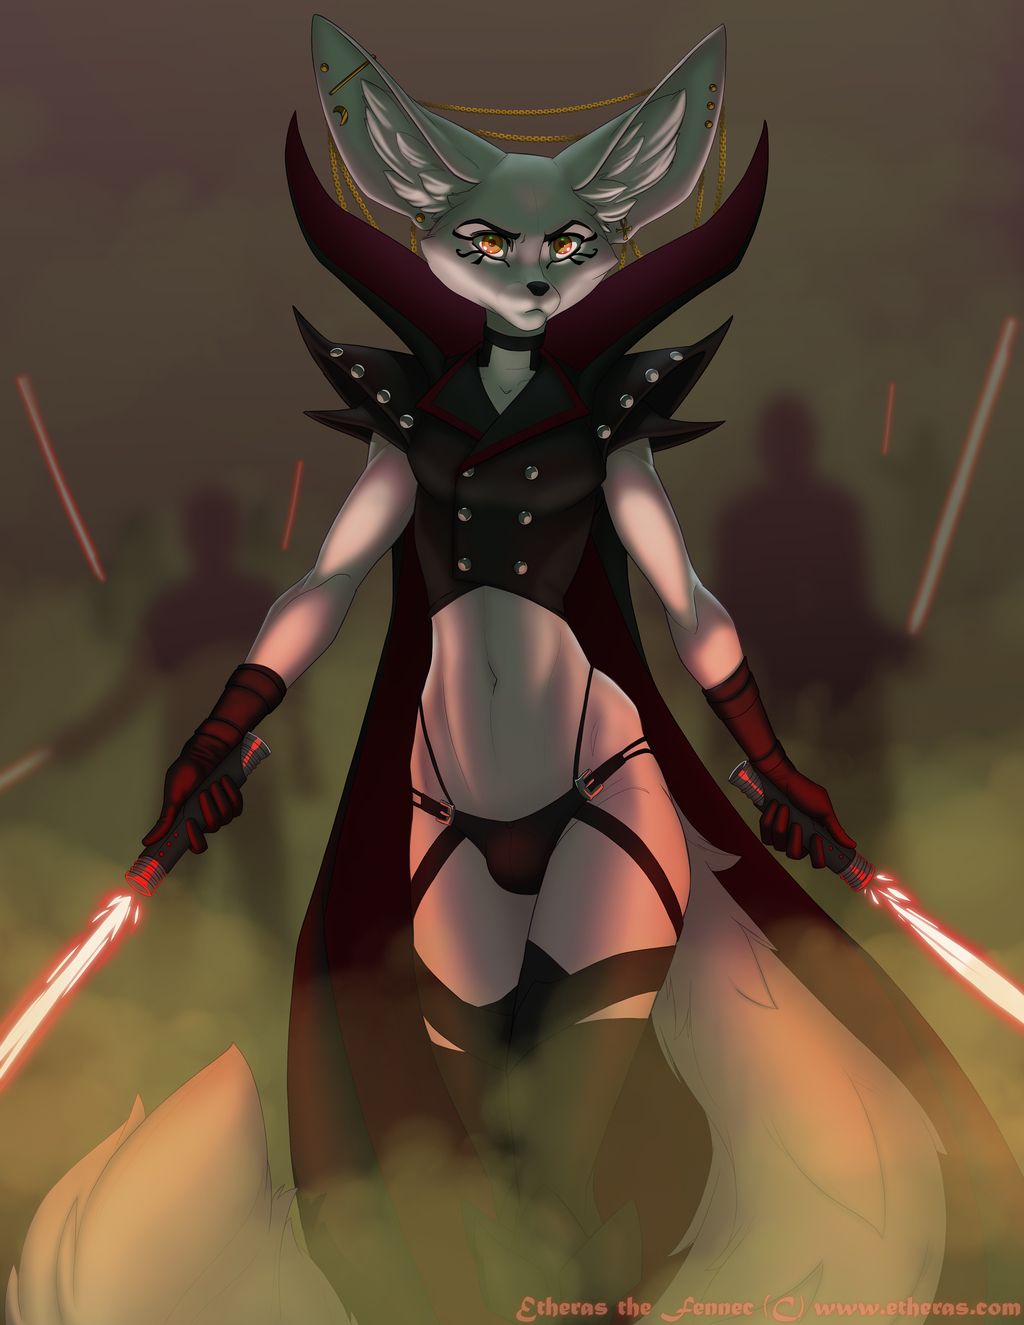 Come to the Dark Side (by Brindle)